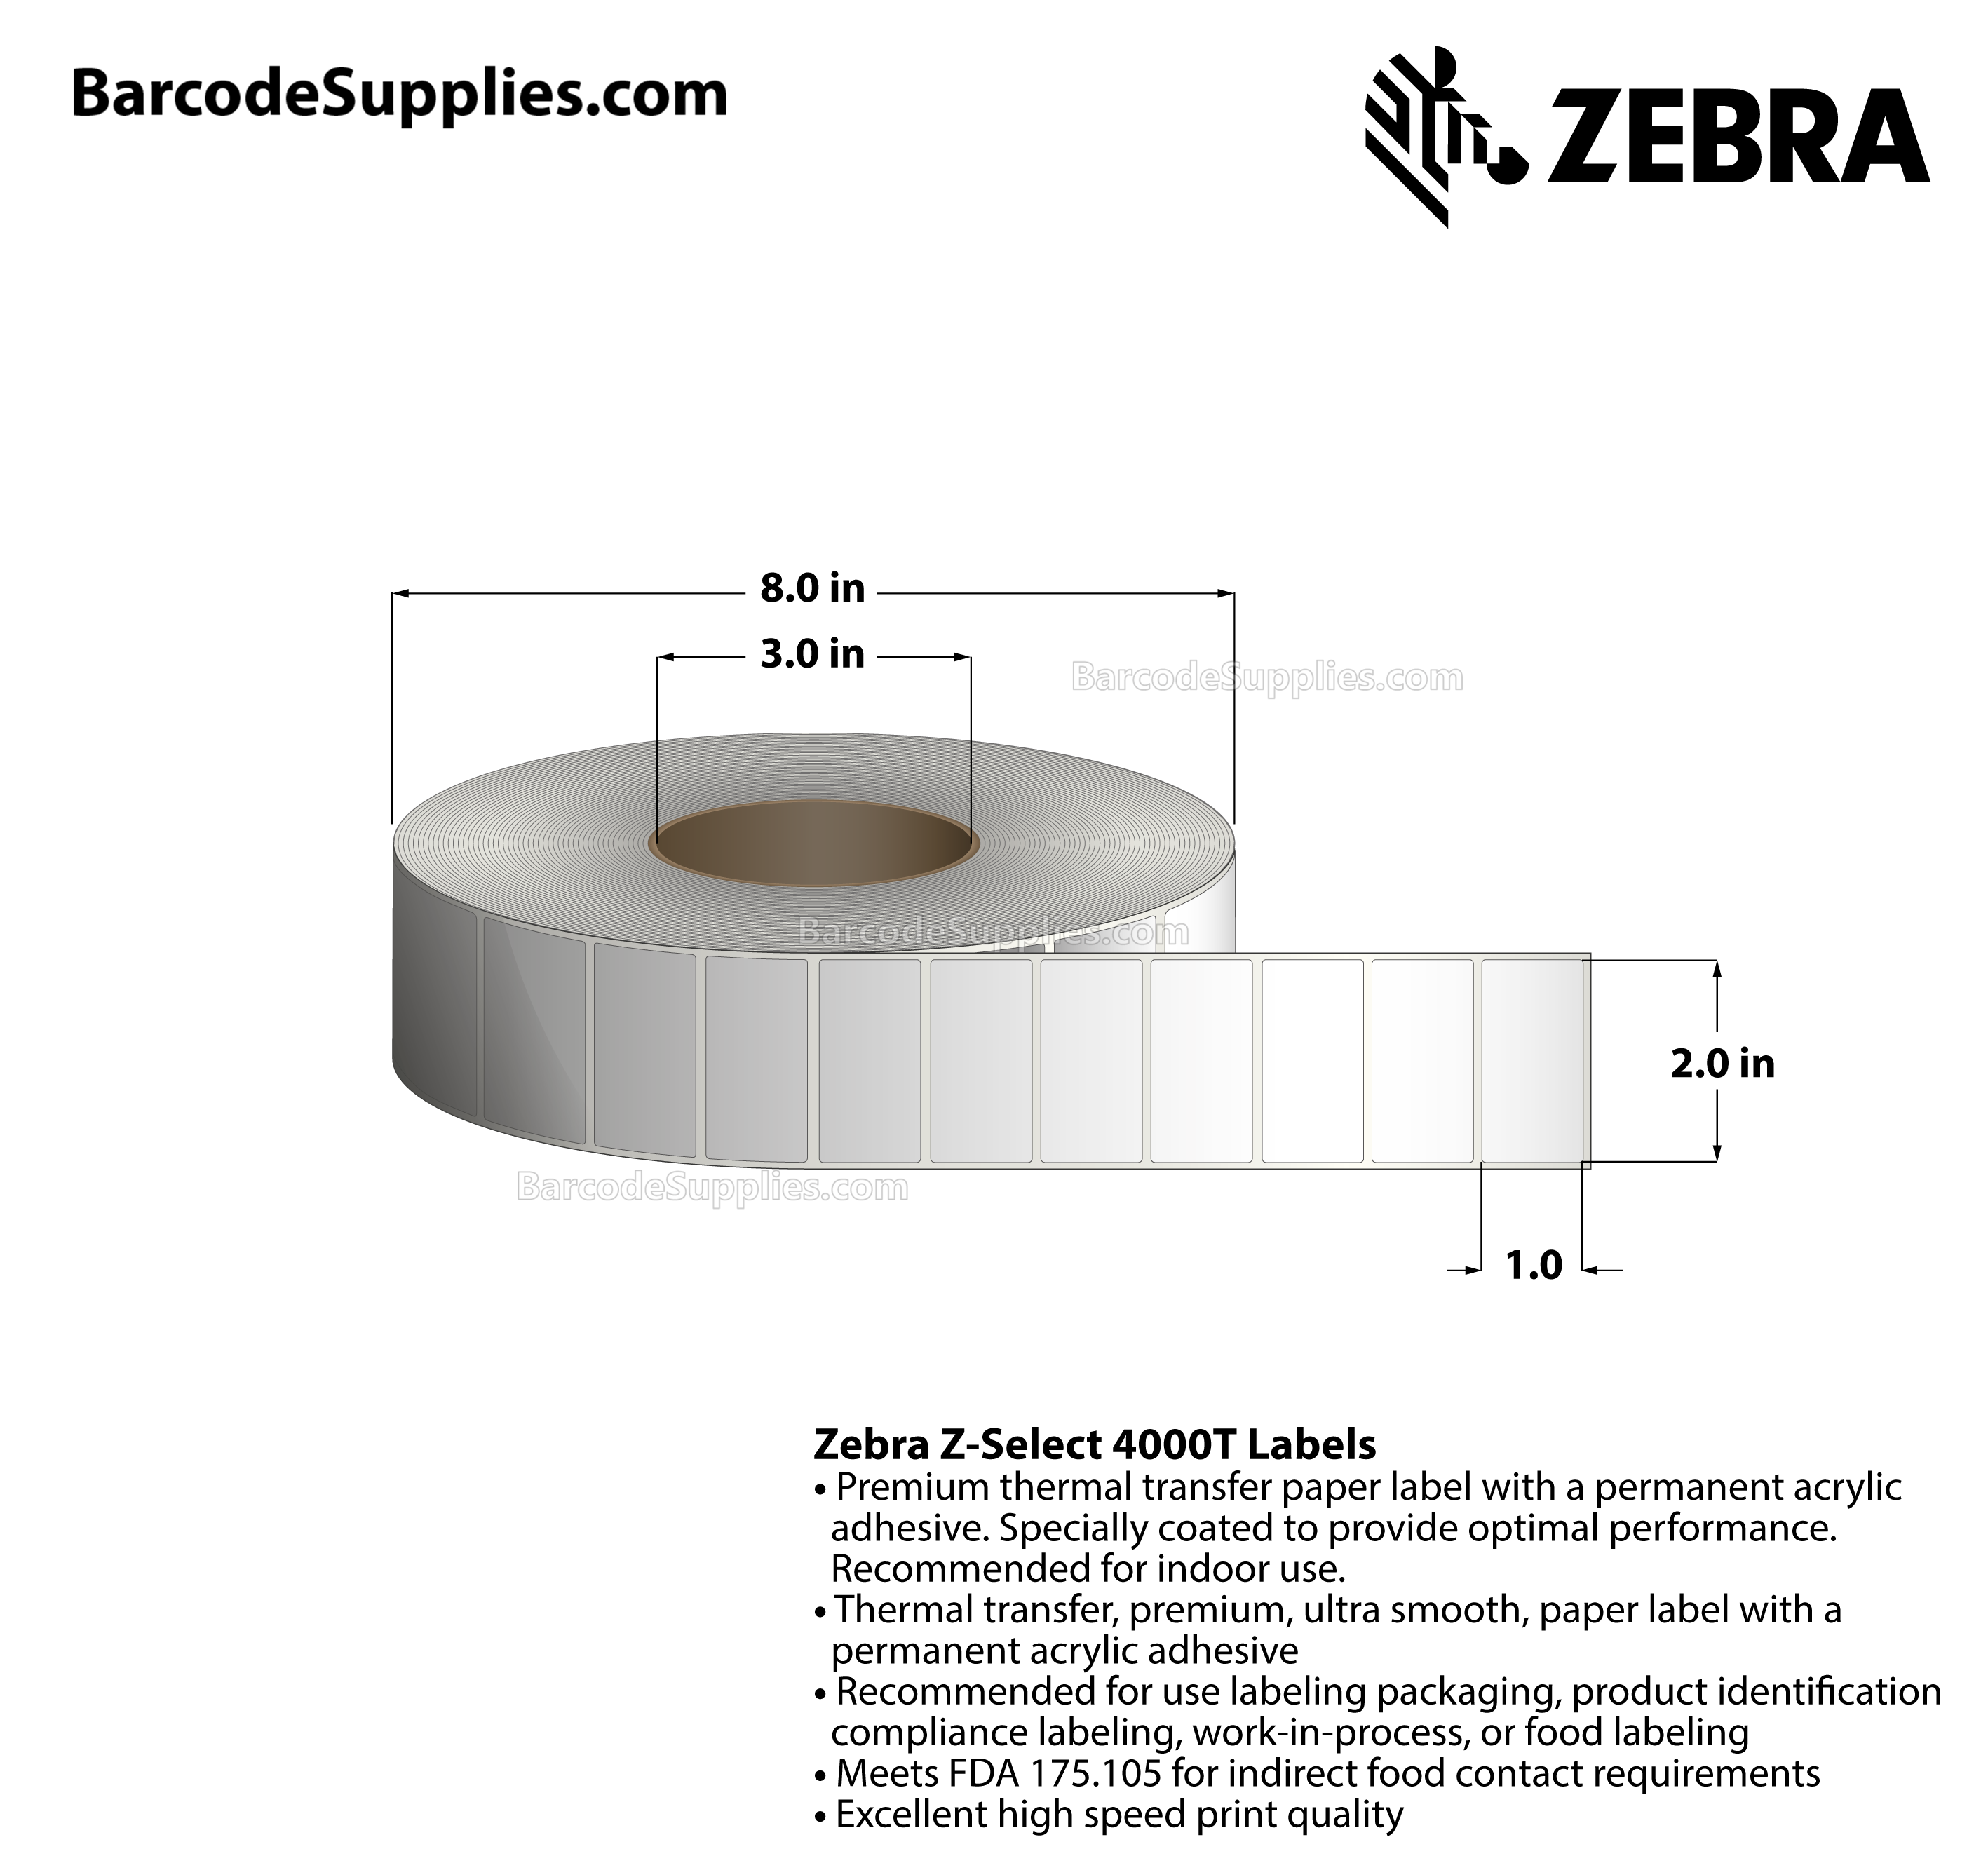 2 x 1 Thermal Transfer White Z-Select 4000T Labels With Permanent Adhesive - Not Perforated - 5180 Labels Per Roll - Carton Of 10 Rolls - 51800 Labels Total - MPN: 72281